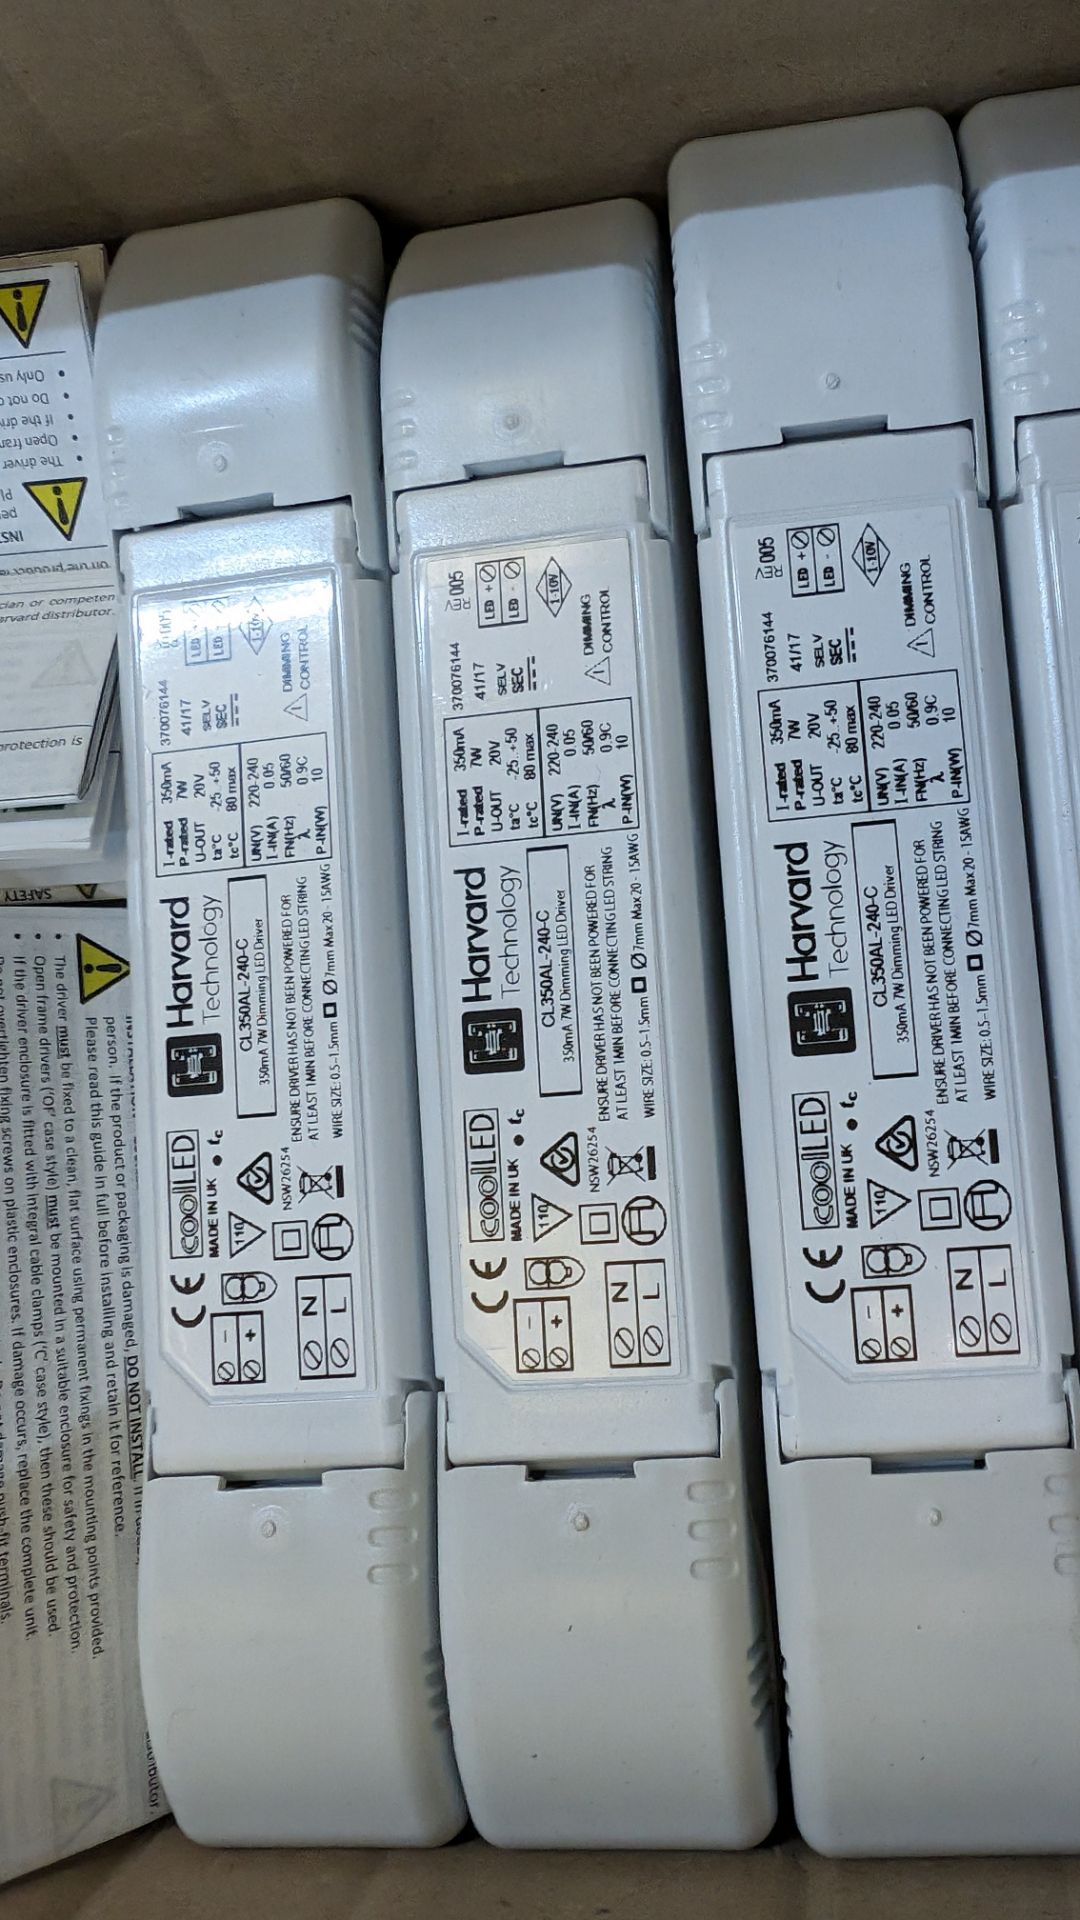 61 off Harvard 7w dimming LED drivers - Image 5 of 6